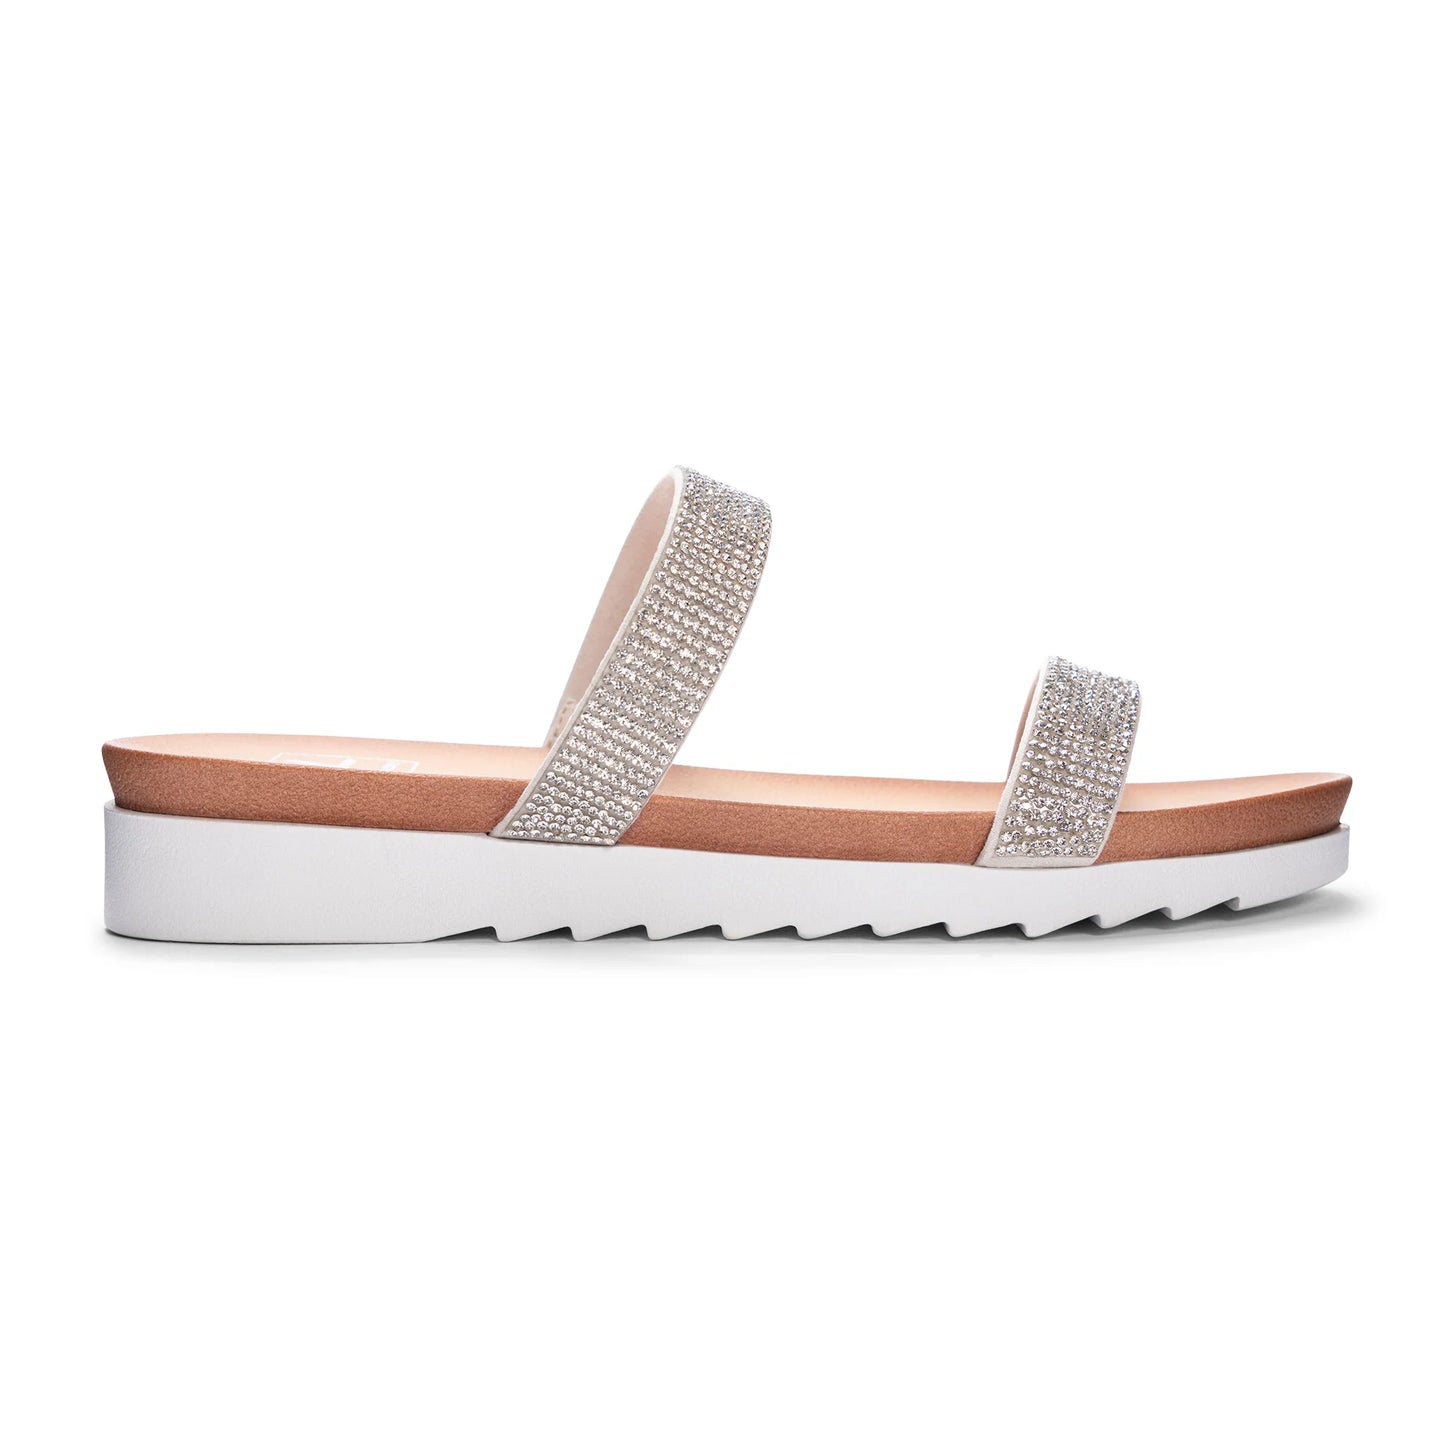 Dirty Laundry Champagne Stones Sandal